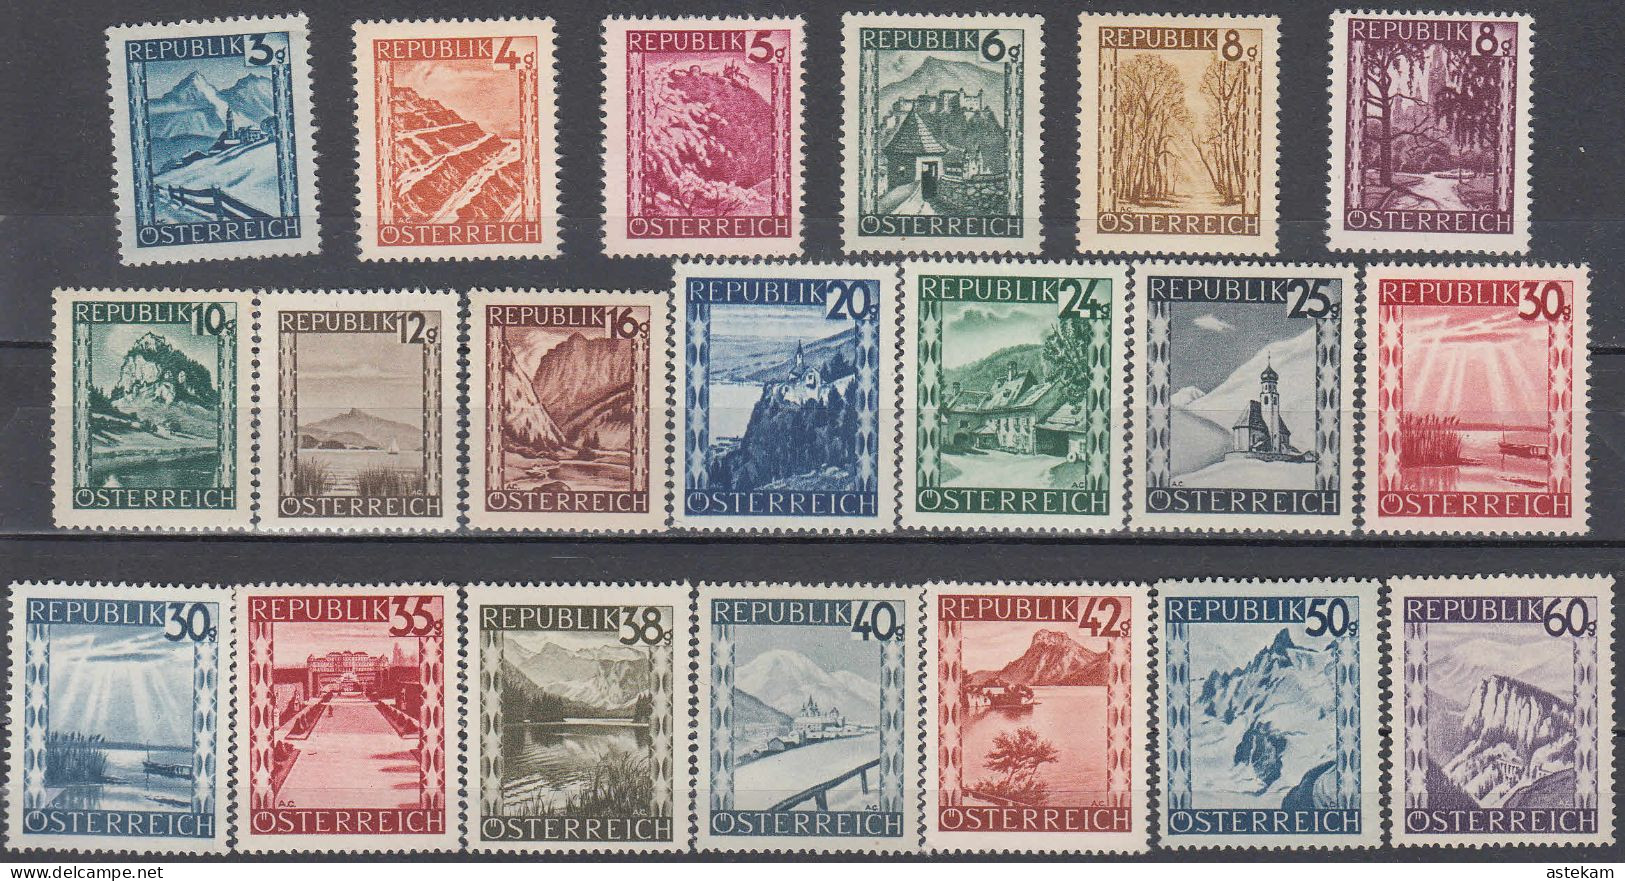 AUSTRIA 1945, VIEWS From AUSTRIA, 20 SEPARATE MNH STAMPS Of SERIES Withn GOOD QUALITY, *** - Gebraucht